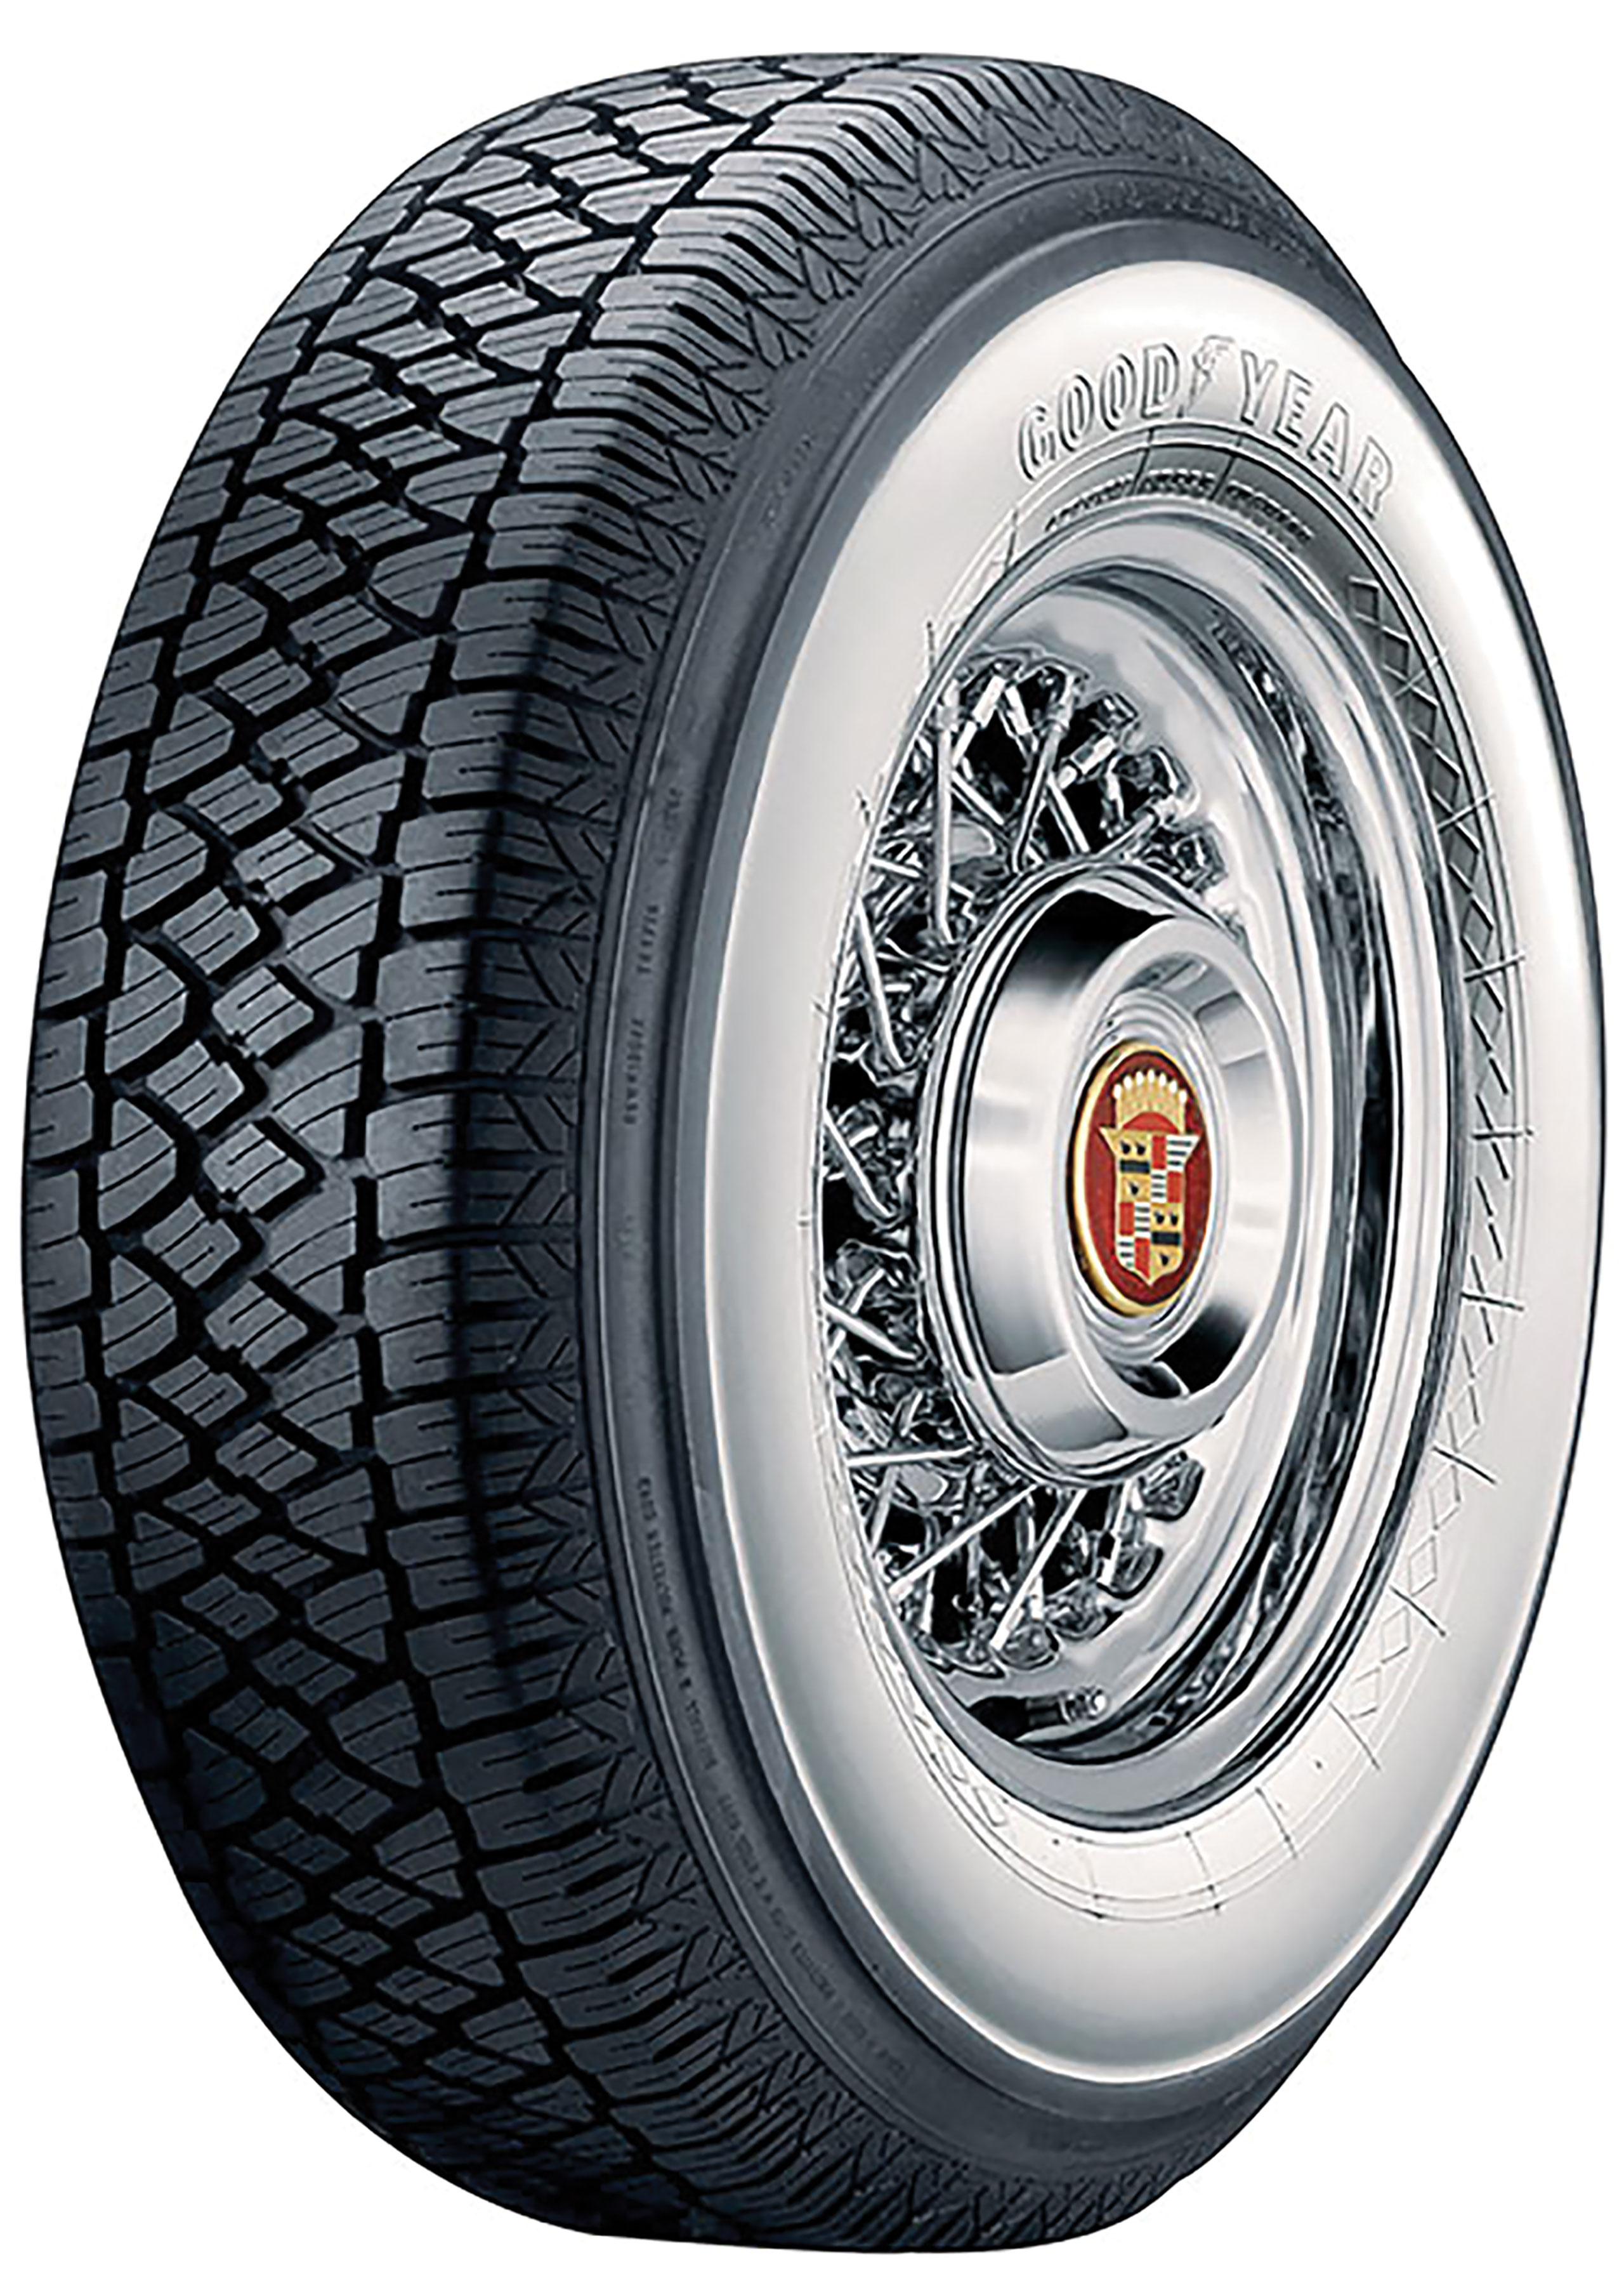 C1 1956-1961 Chevrolet Corvette Tire. Goodyear Classic Radial P205/75 R15 - 2 3/4 Inch White Wall - Goodyear Tires